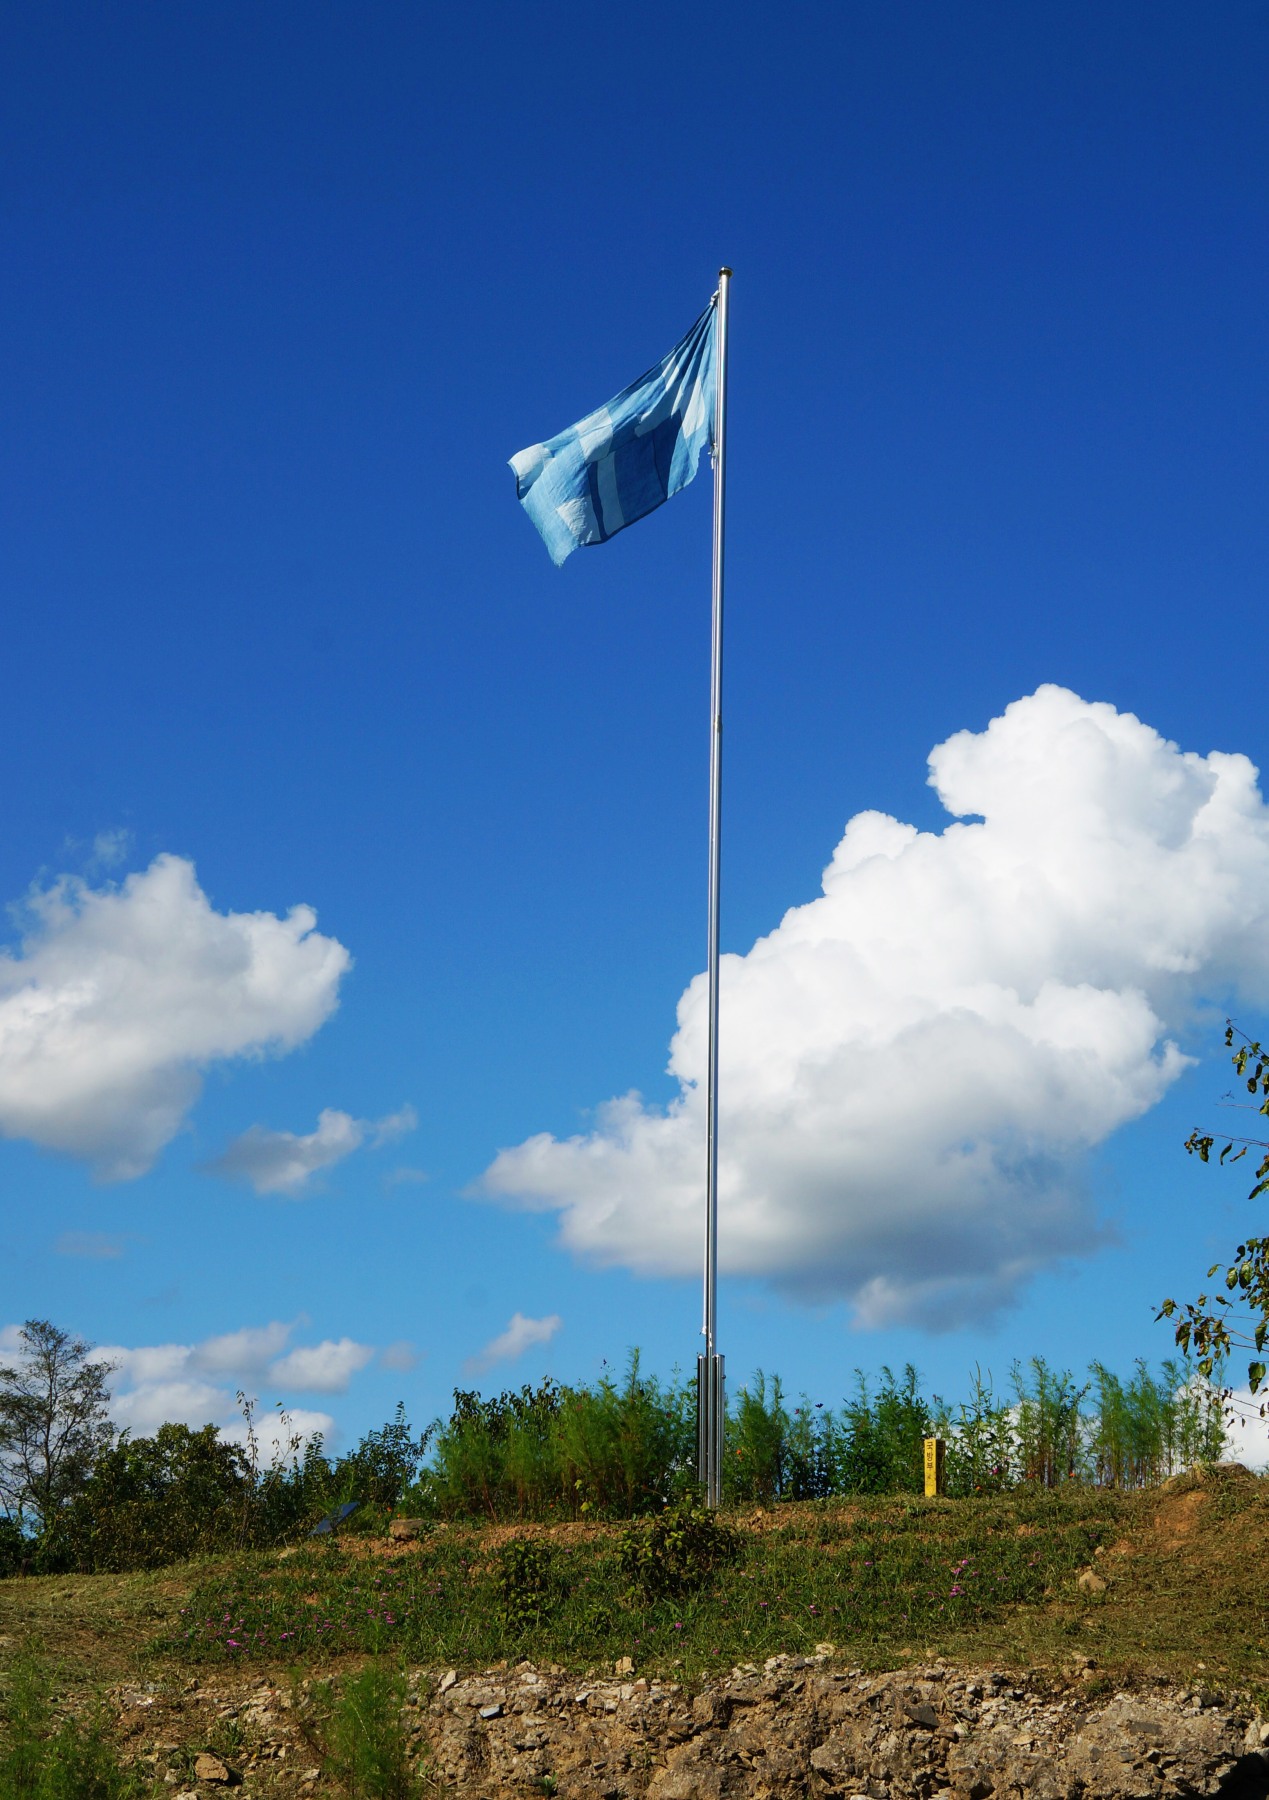 Sky blue flag on a flag pole stands under a clear sky and on soil with vegetation